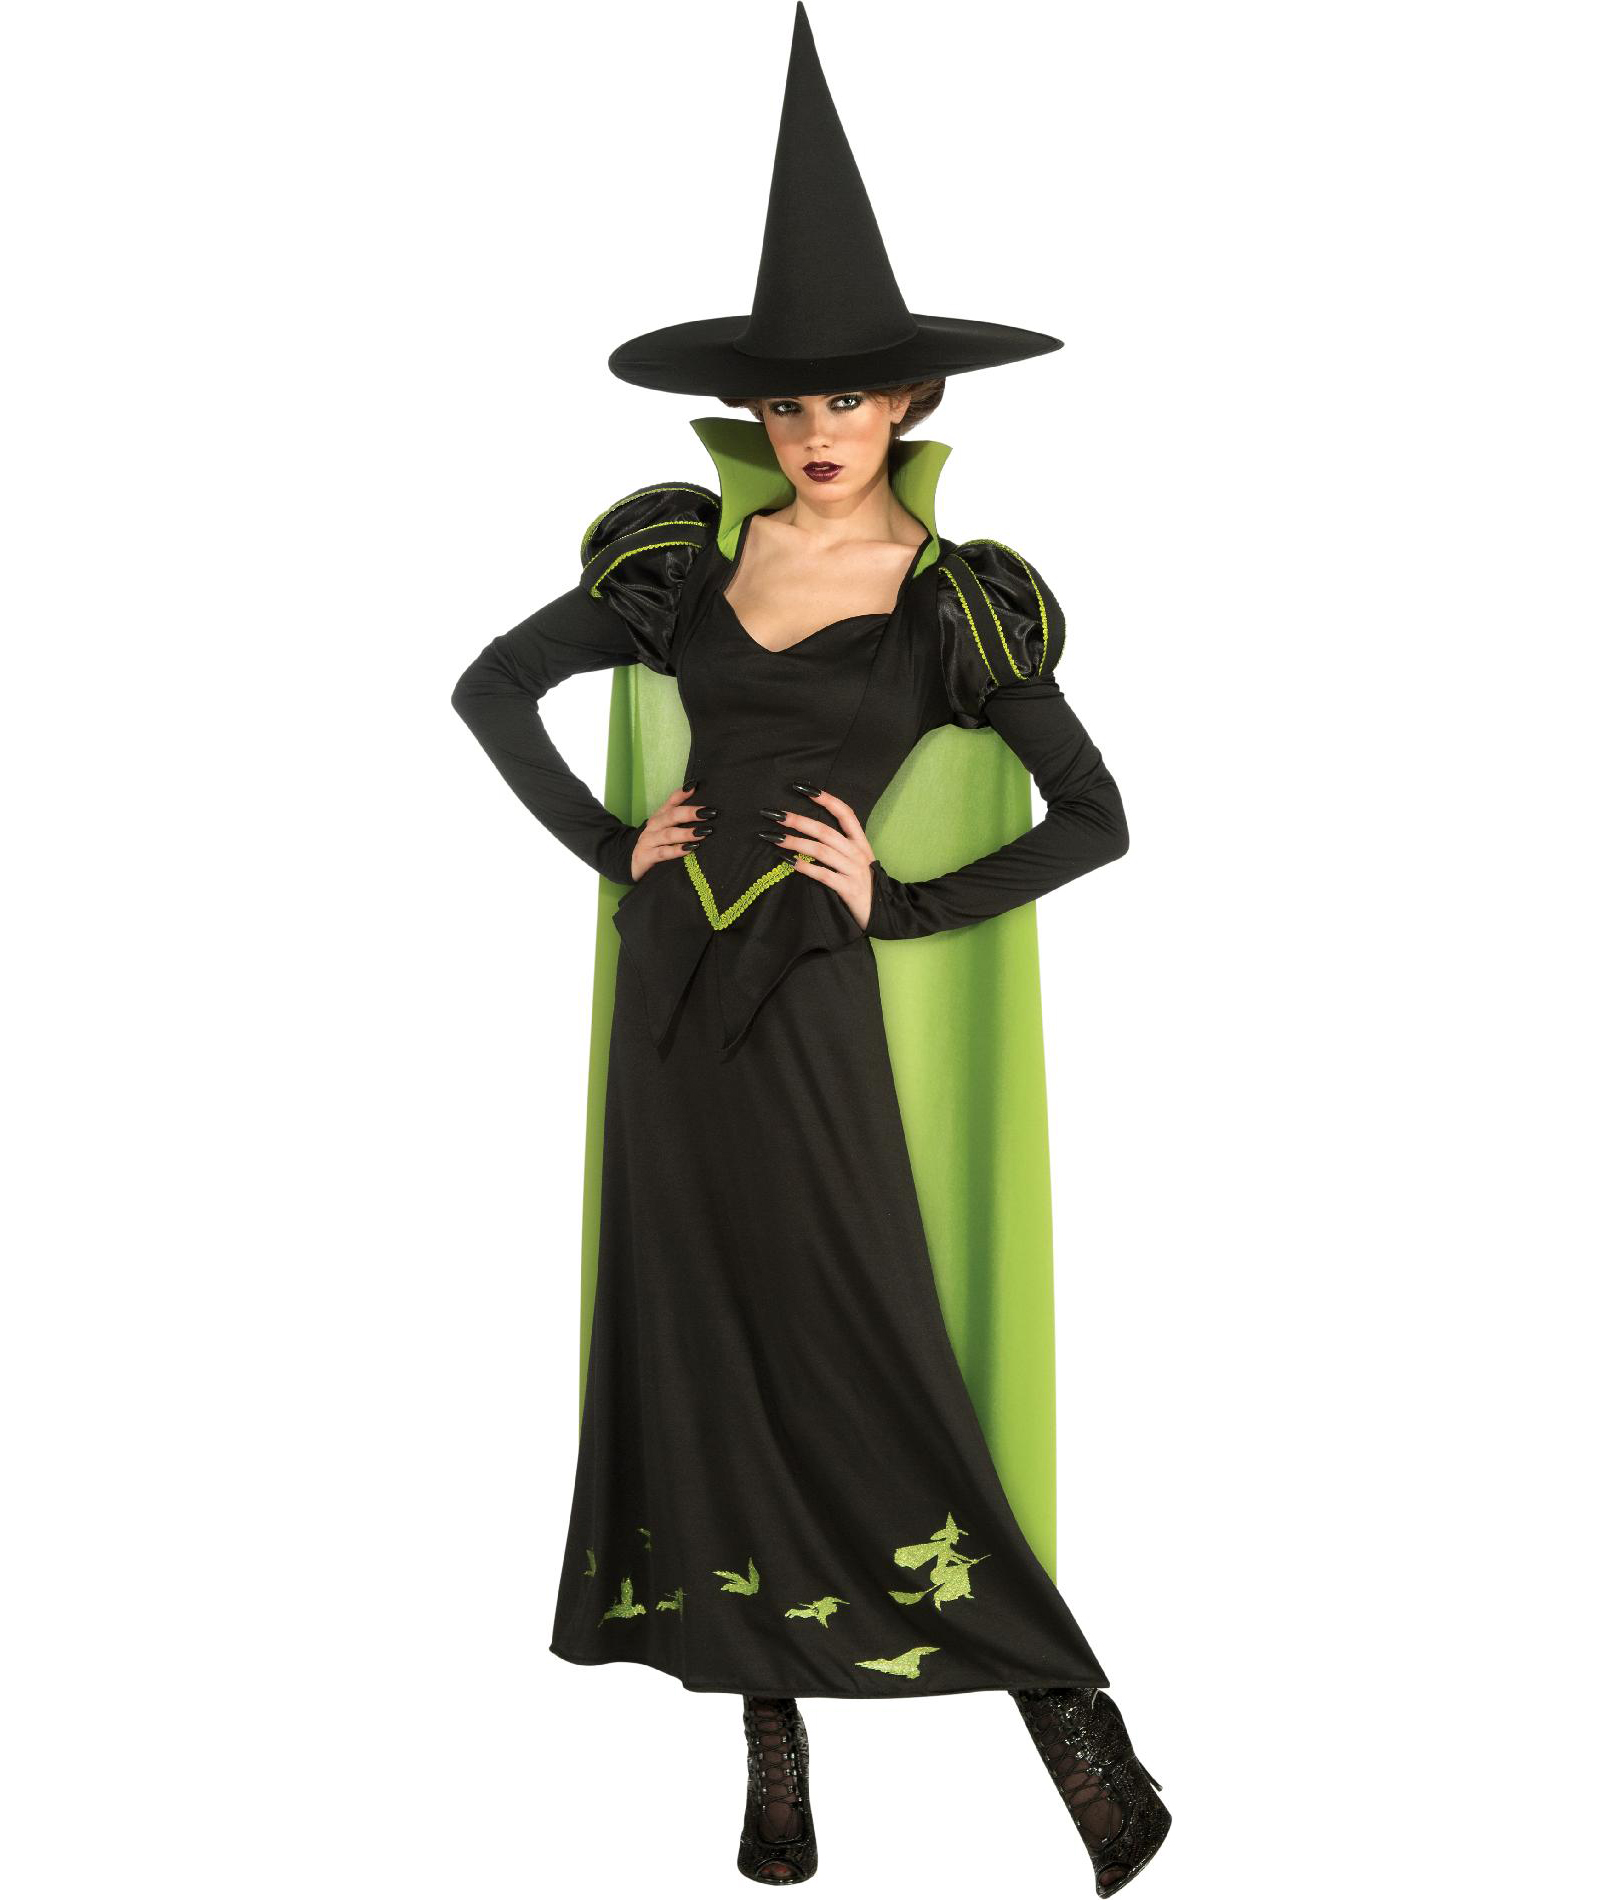 Rubie's Costume Co Women's Wicked Witch of the West Costume - Wizard of Oz